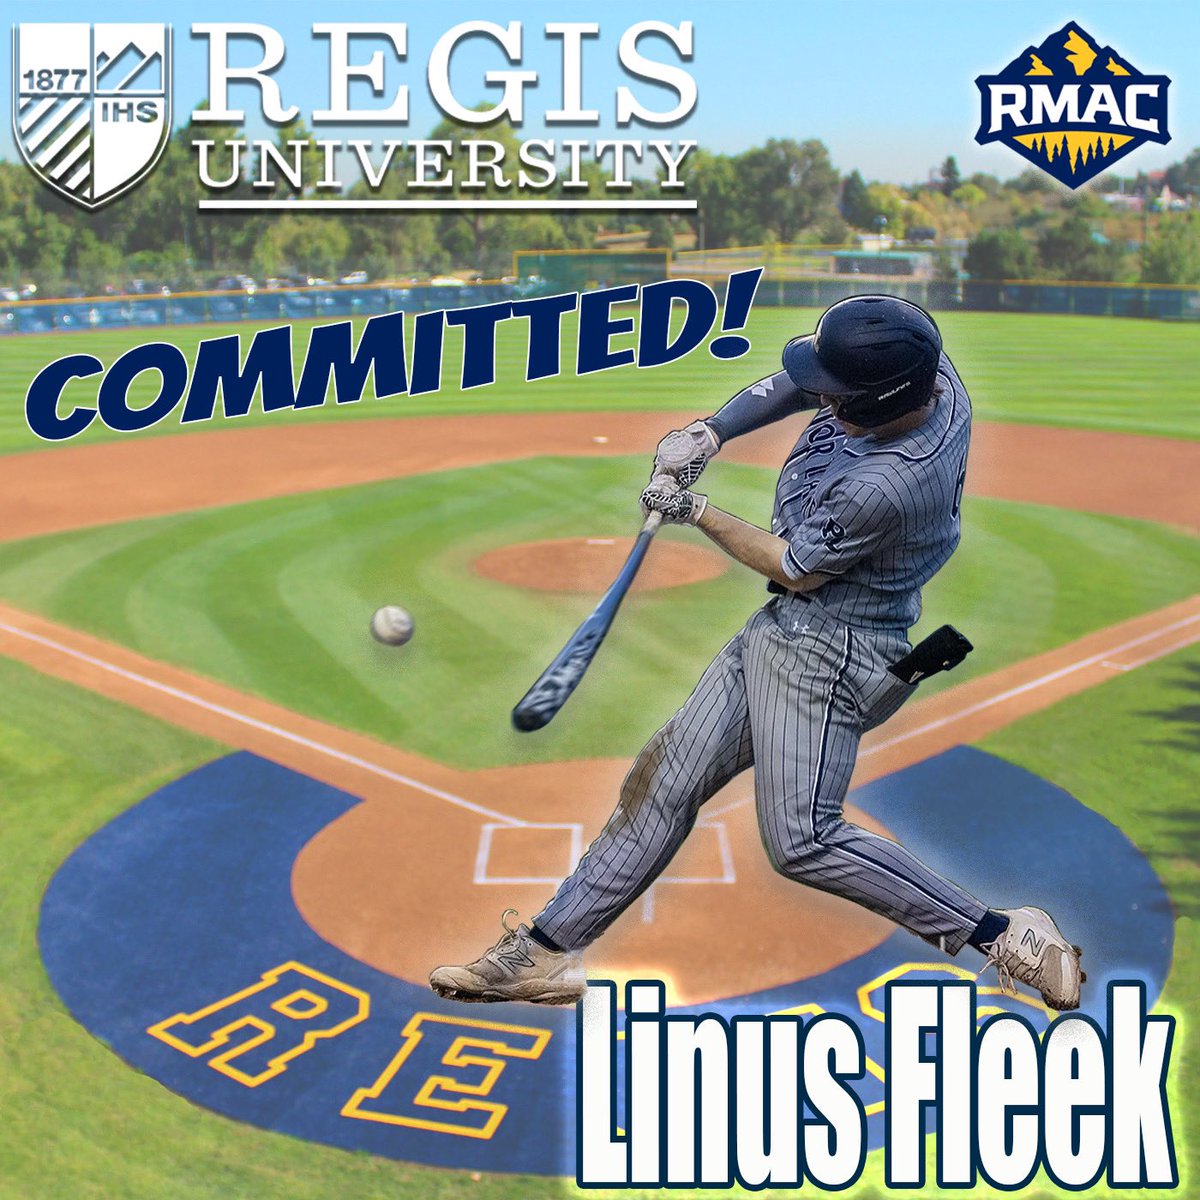 I am very excited & blessed to announce I will be continuing my education & athletic career at Regis University in Denver. I would like to thank God, my family, & all the coaches & teammates along the way for getting me where I am today. #RangerUp #ShovelBoys